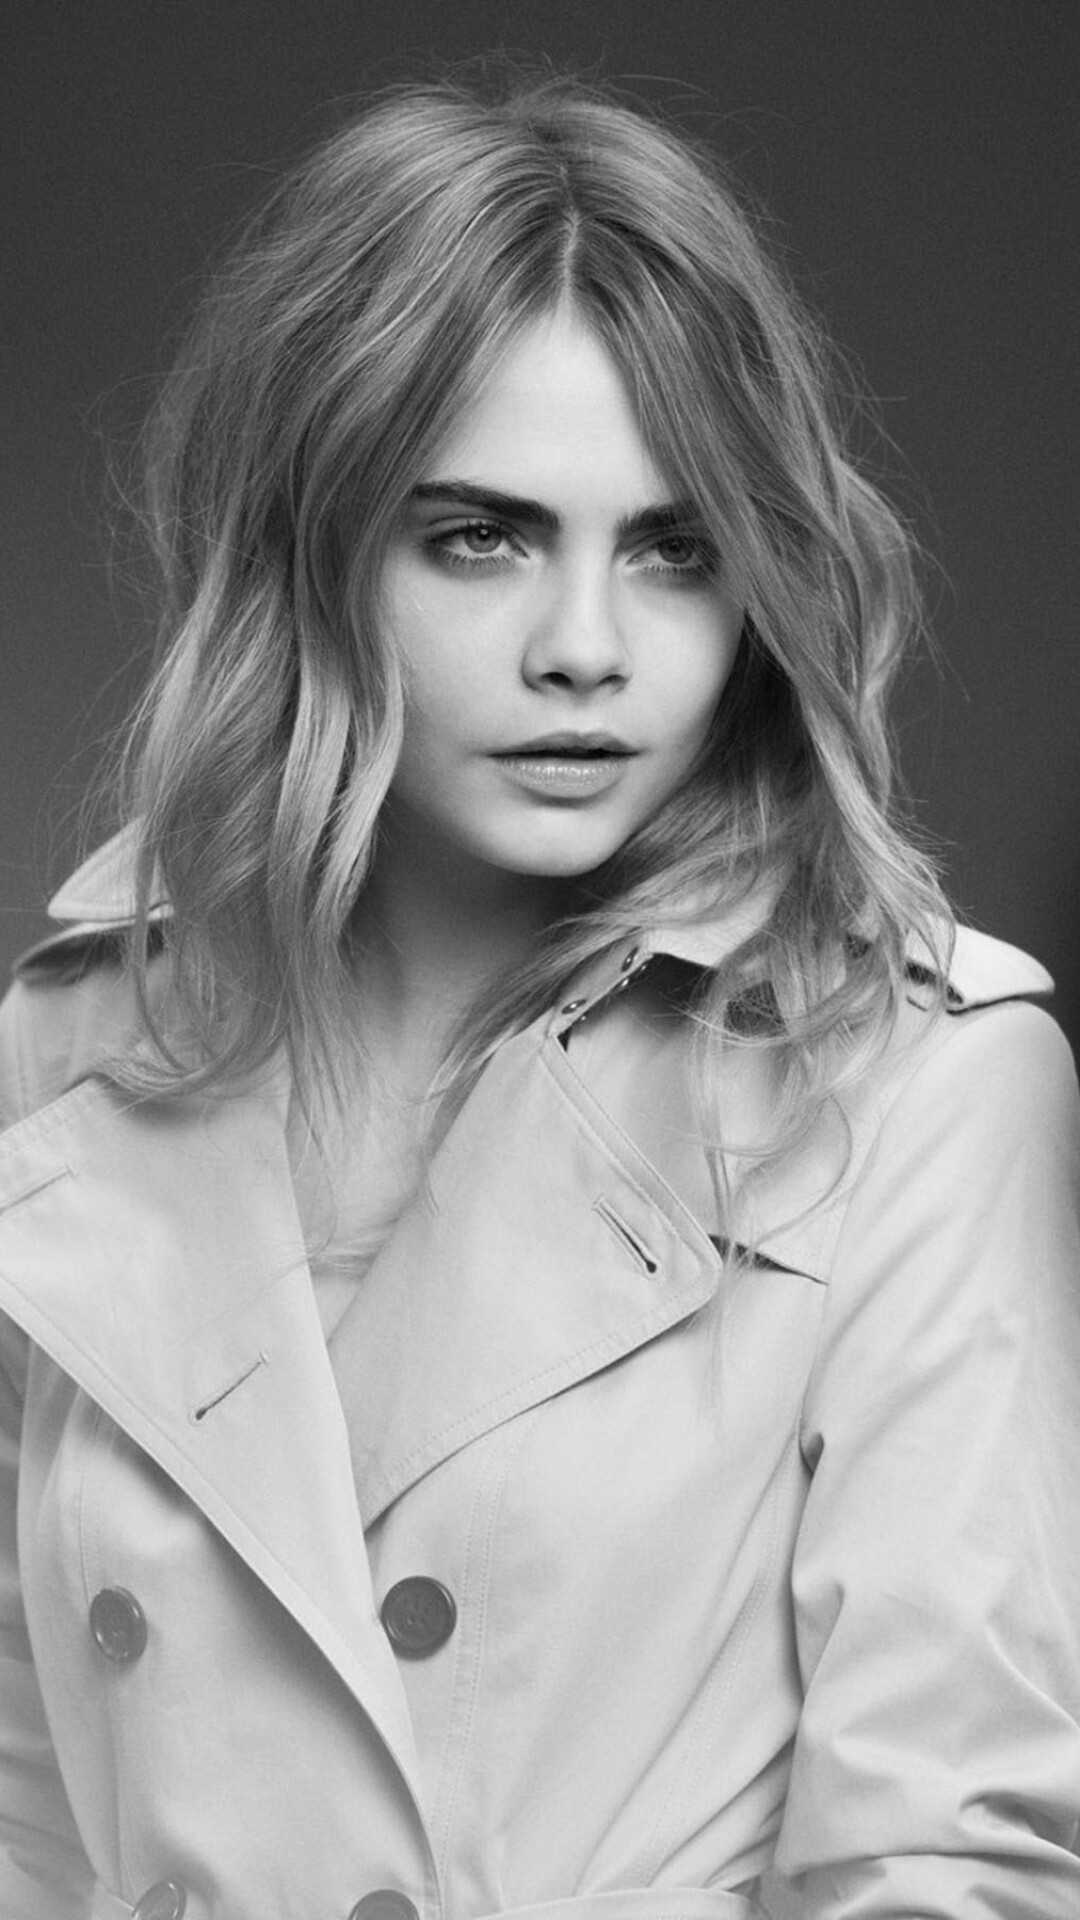 Cara Delevingne: Known for her associations with Chanel under Karl Lagerfeld and Burberry under Christopher Bailey. 1080x1920 Full HD Wallpaper.